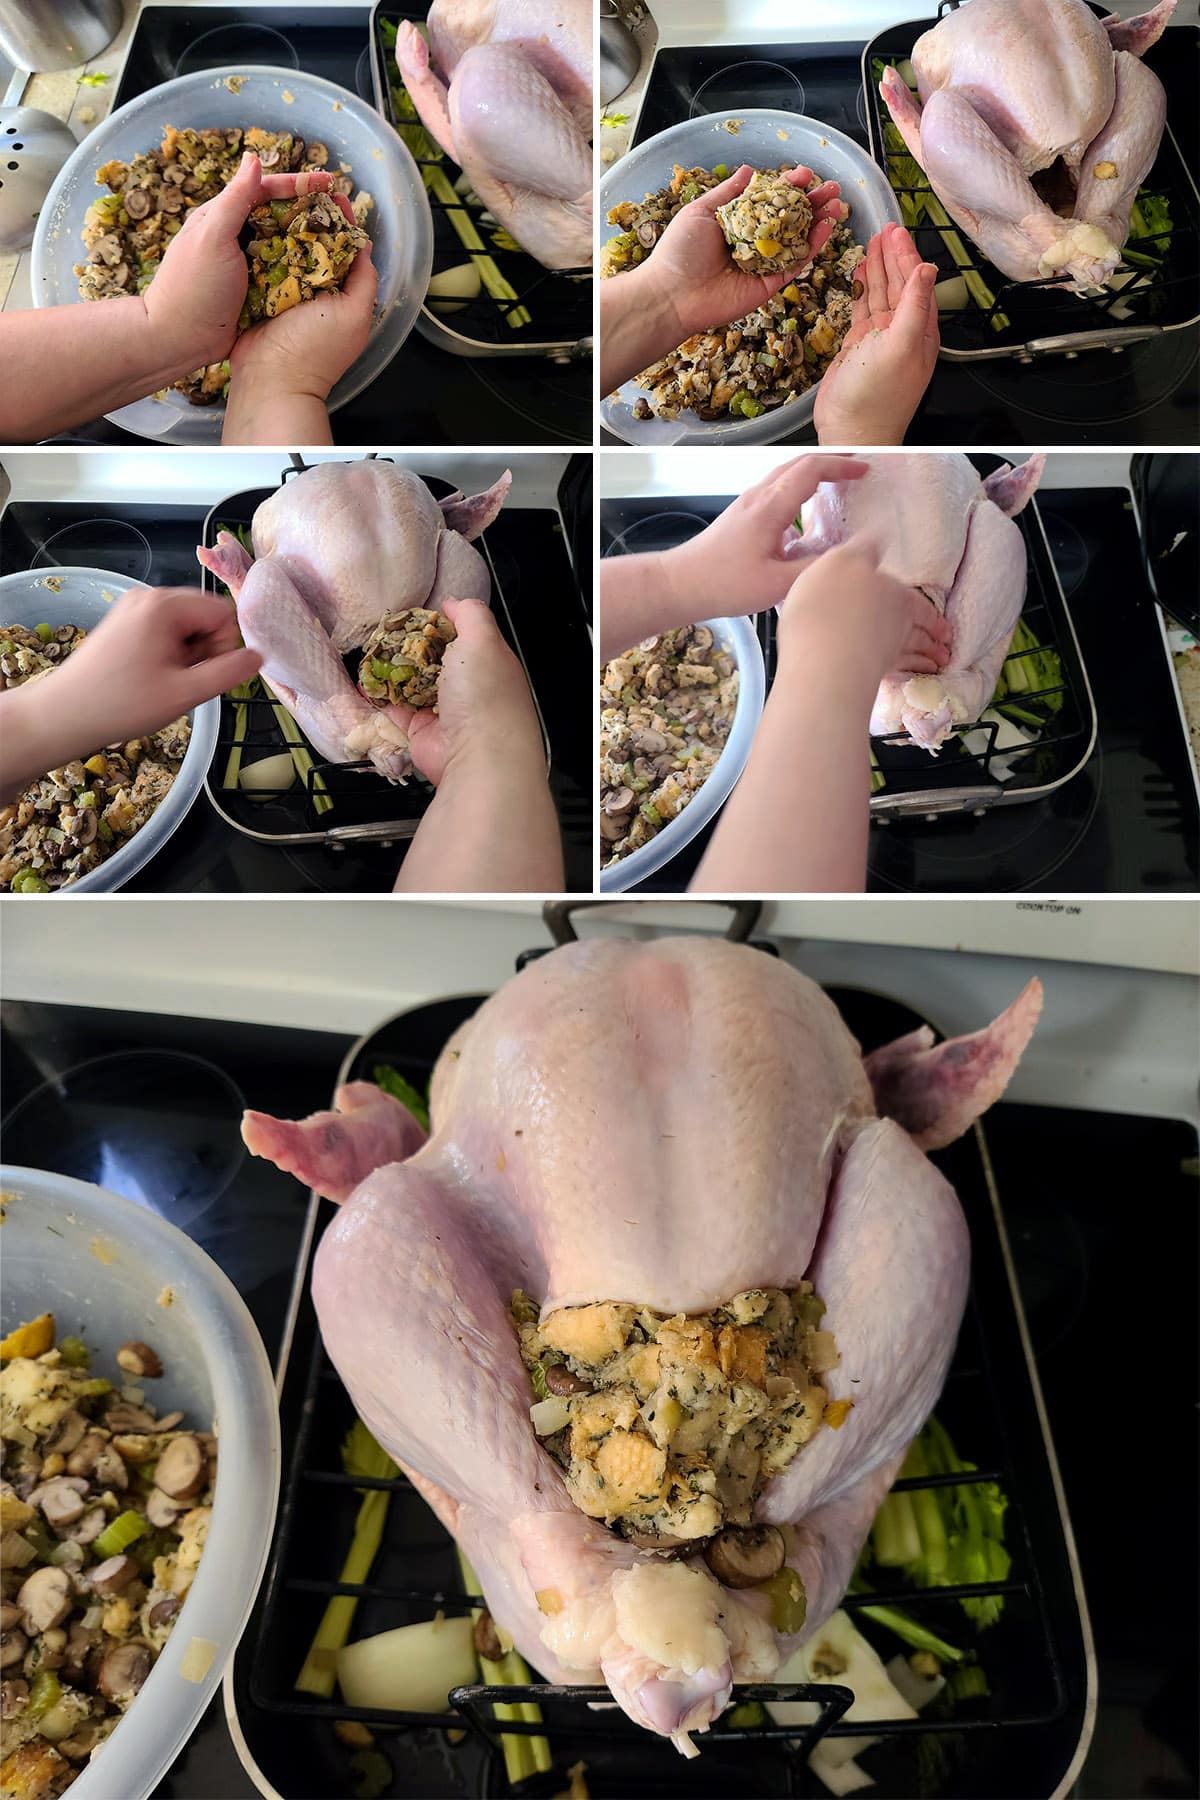 A 5 part image showing a raw turkey being stuffed with the mushroom stuffing.